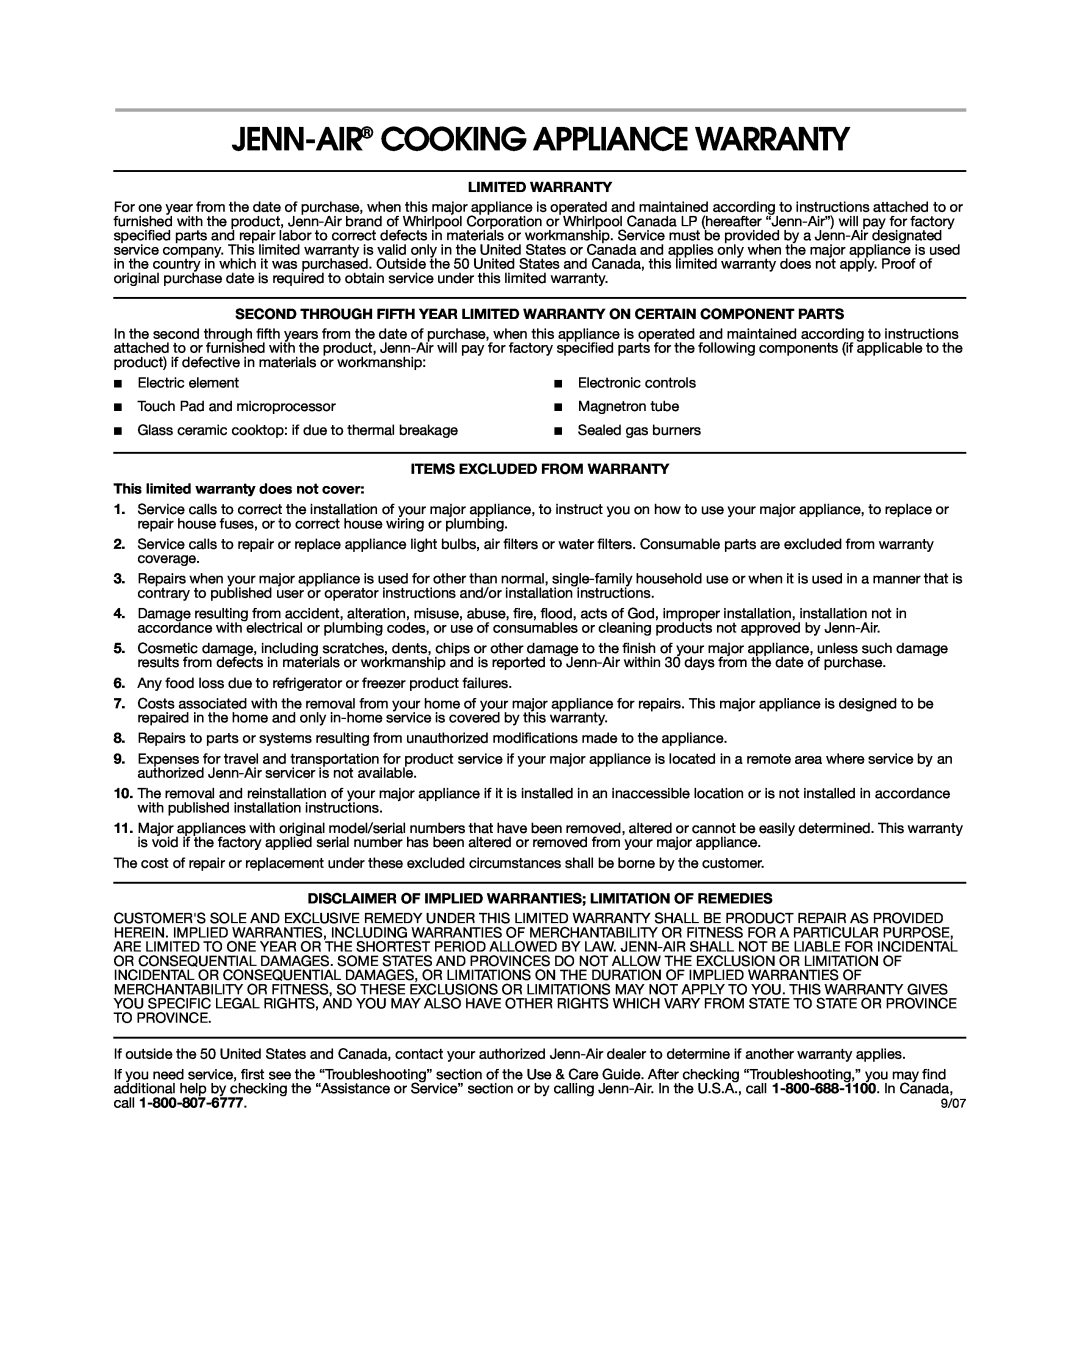 Jenn-Air 8113P754-60 important safety instructions Jenn-Air Cooking Appliance Warranty, Limited Warranty, call 